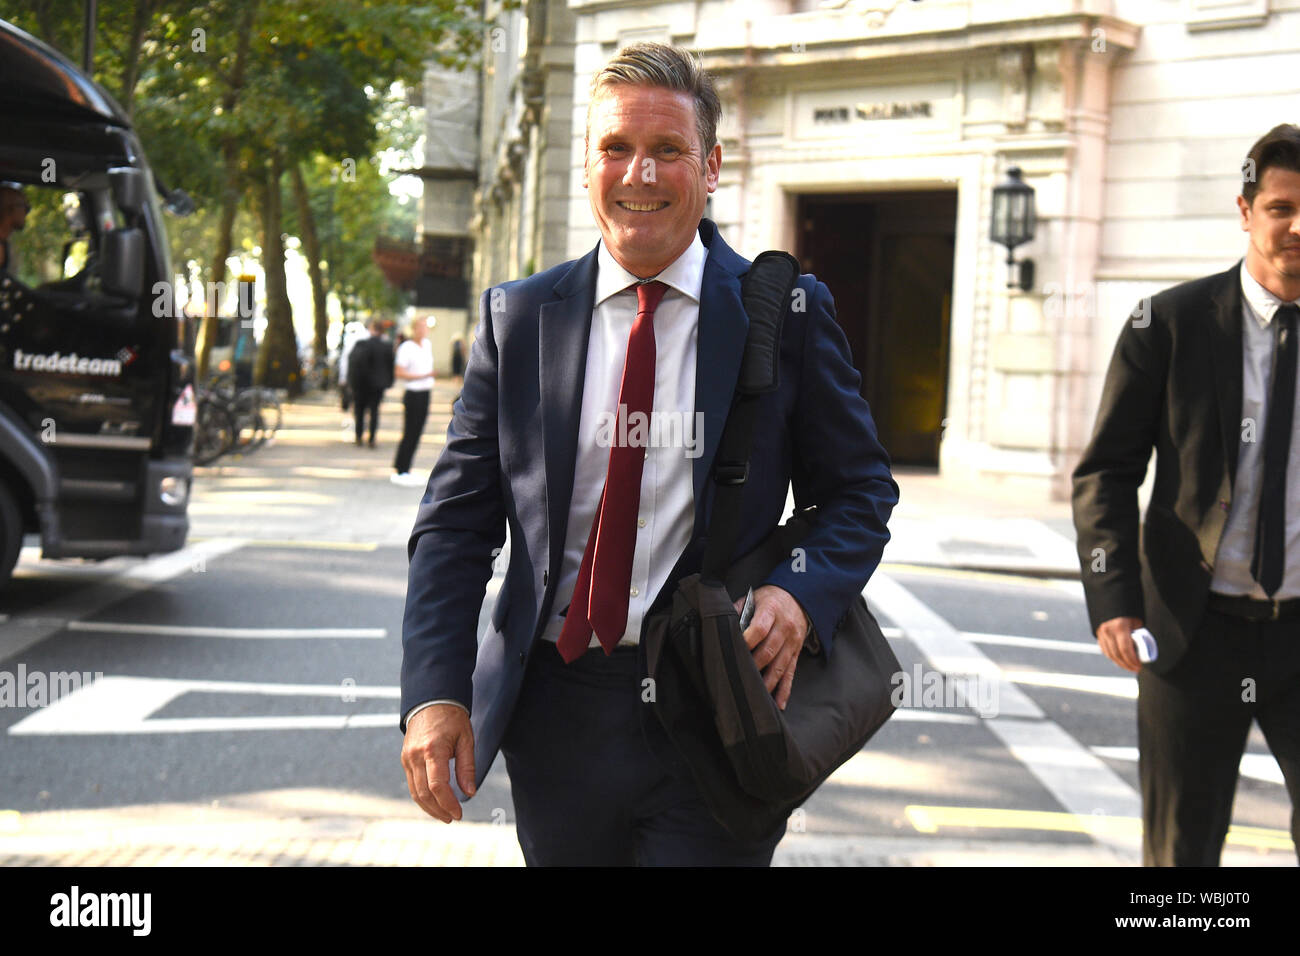 Keir Starmer, Shadow Secretary of State for Exiting the European Union leaving Millbank, ahead of today's cross party meeting looking at ways to stop a no deal Brexit. Stock Photo